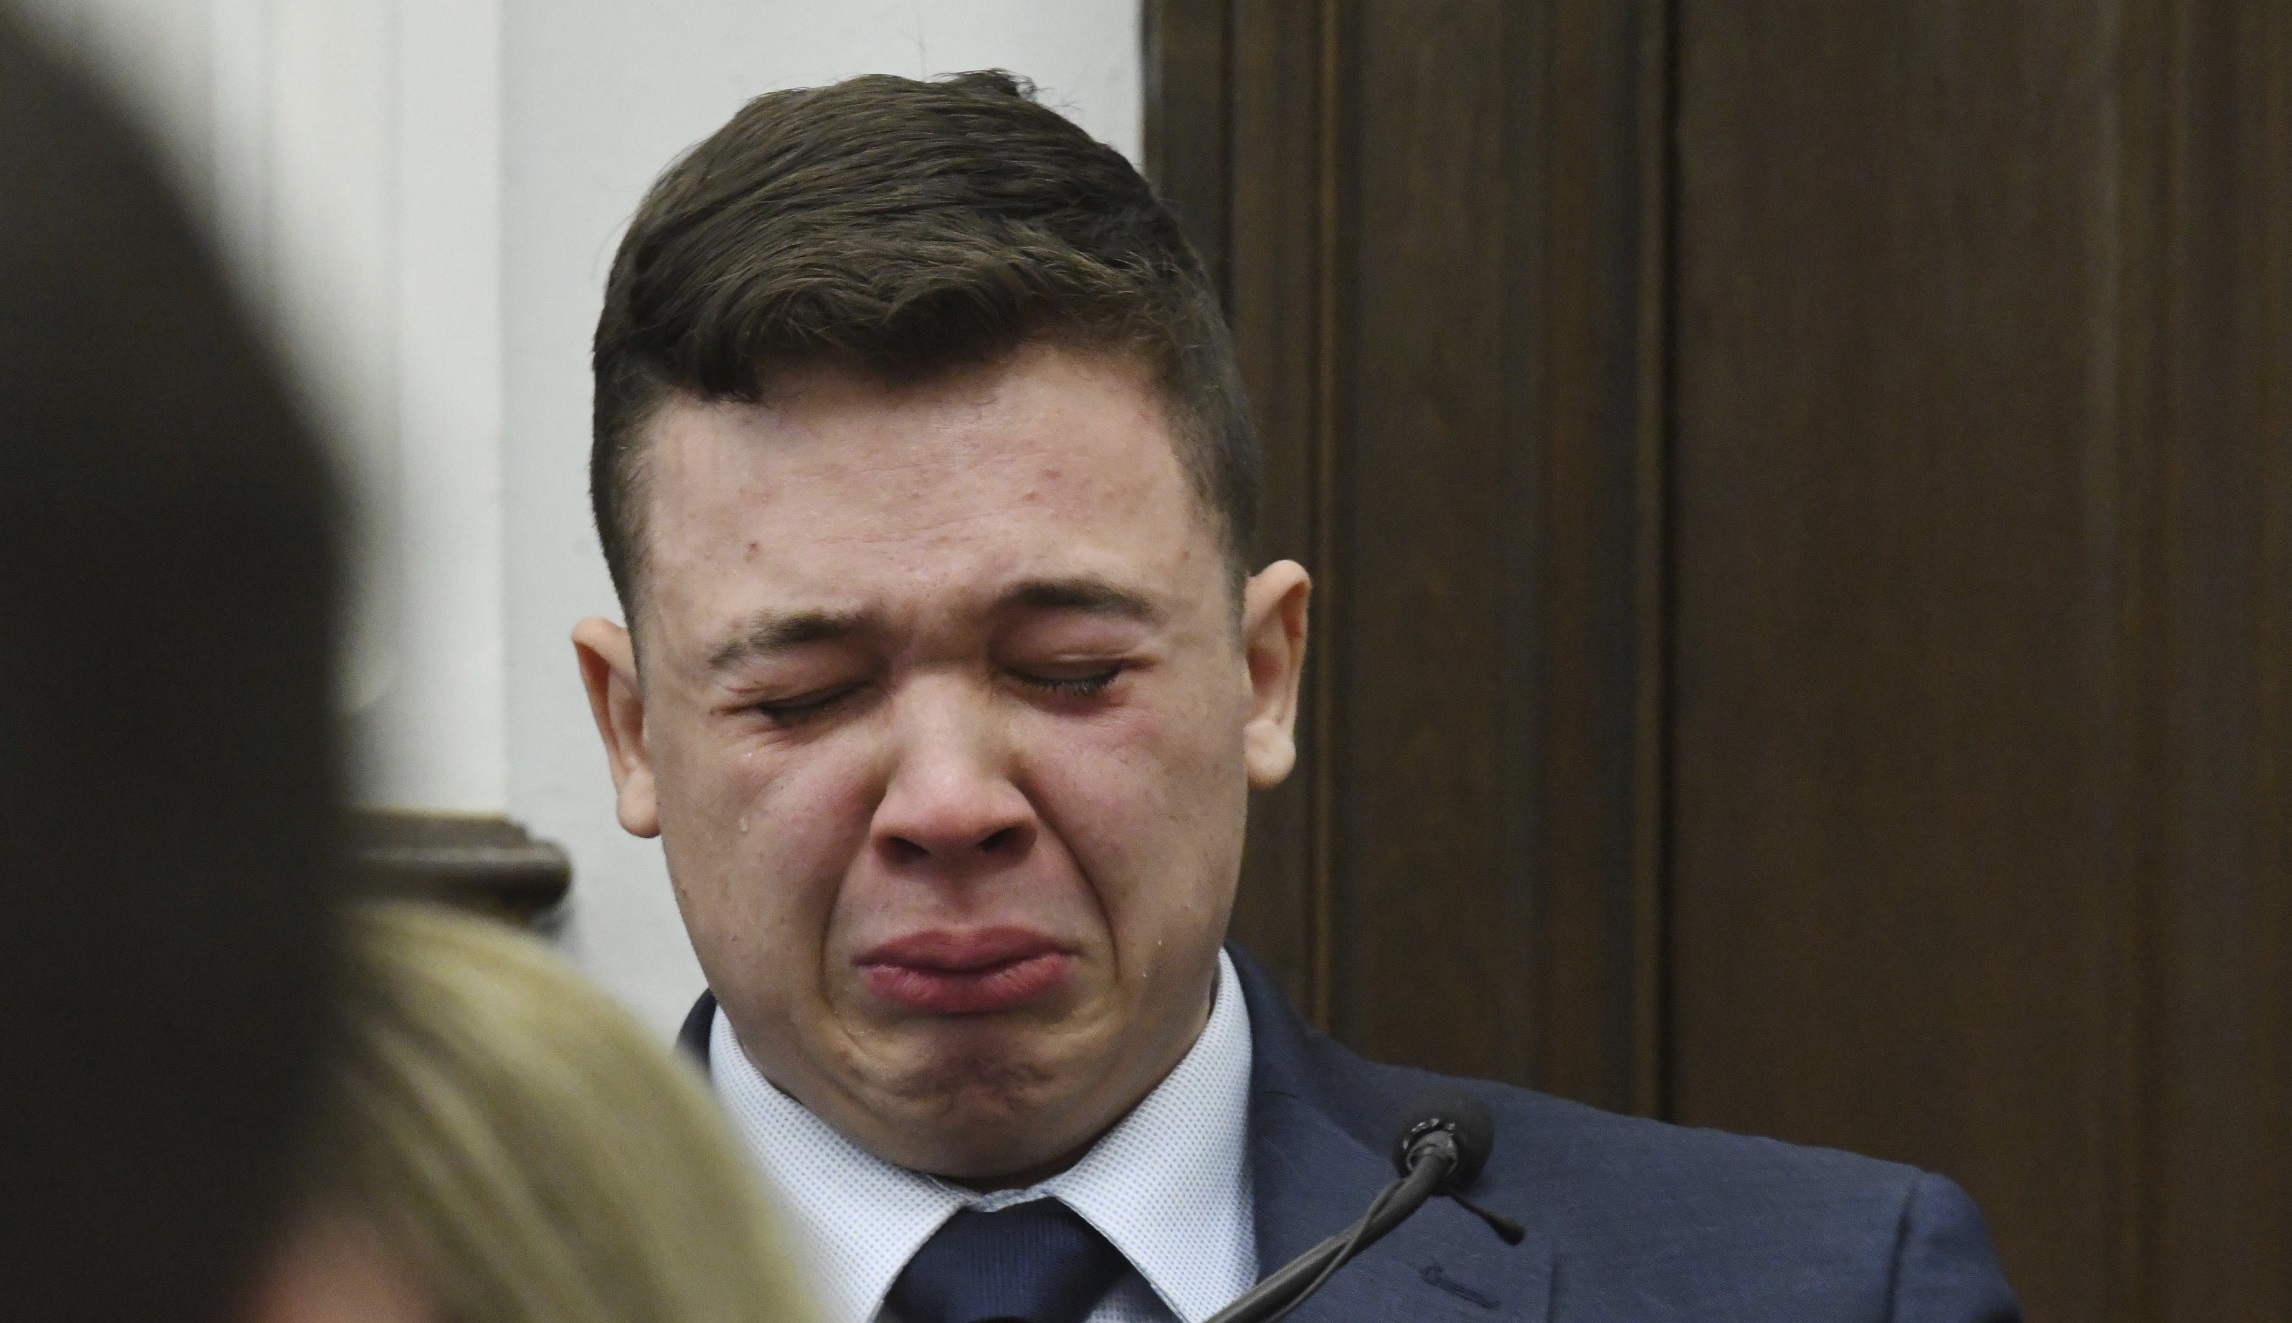 Kyle Rittenhouse breaks down on the stand